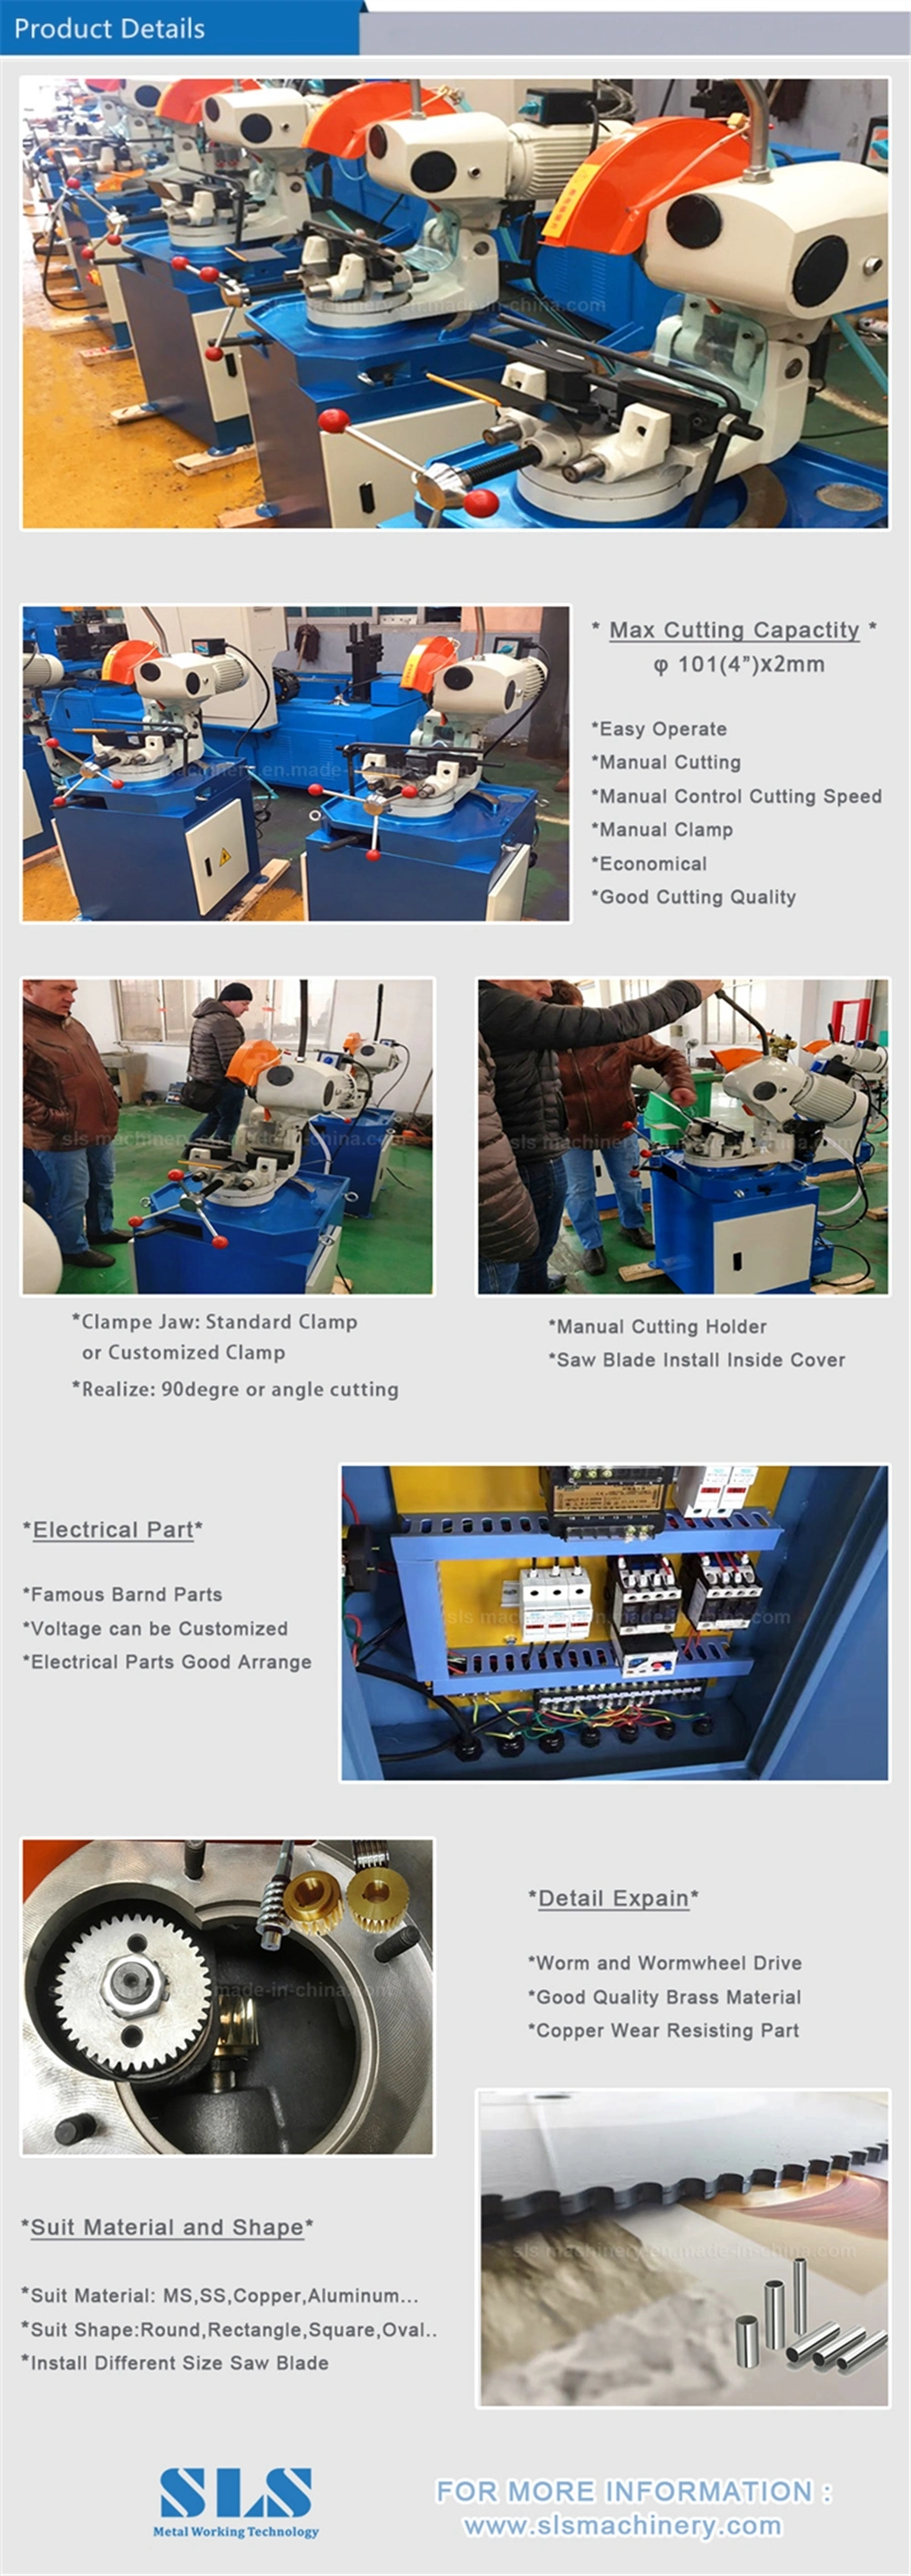 Manual Tube Cold Cut off Metal Cutting Saw Machine for Sale